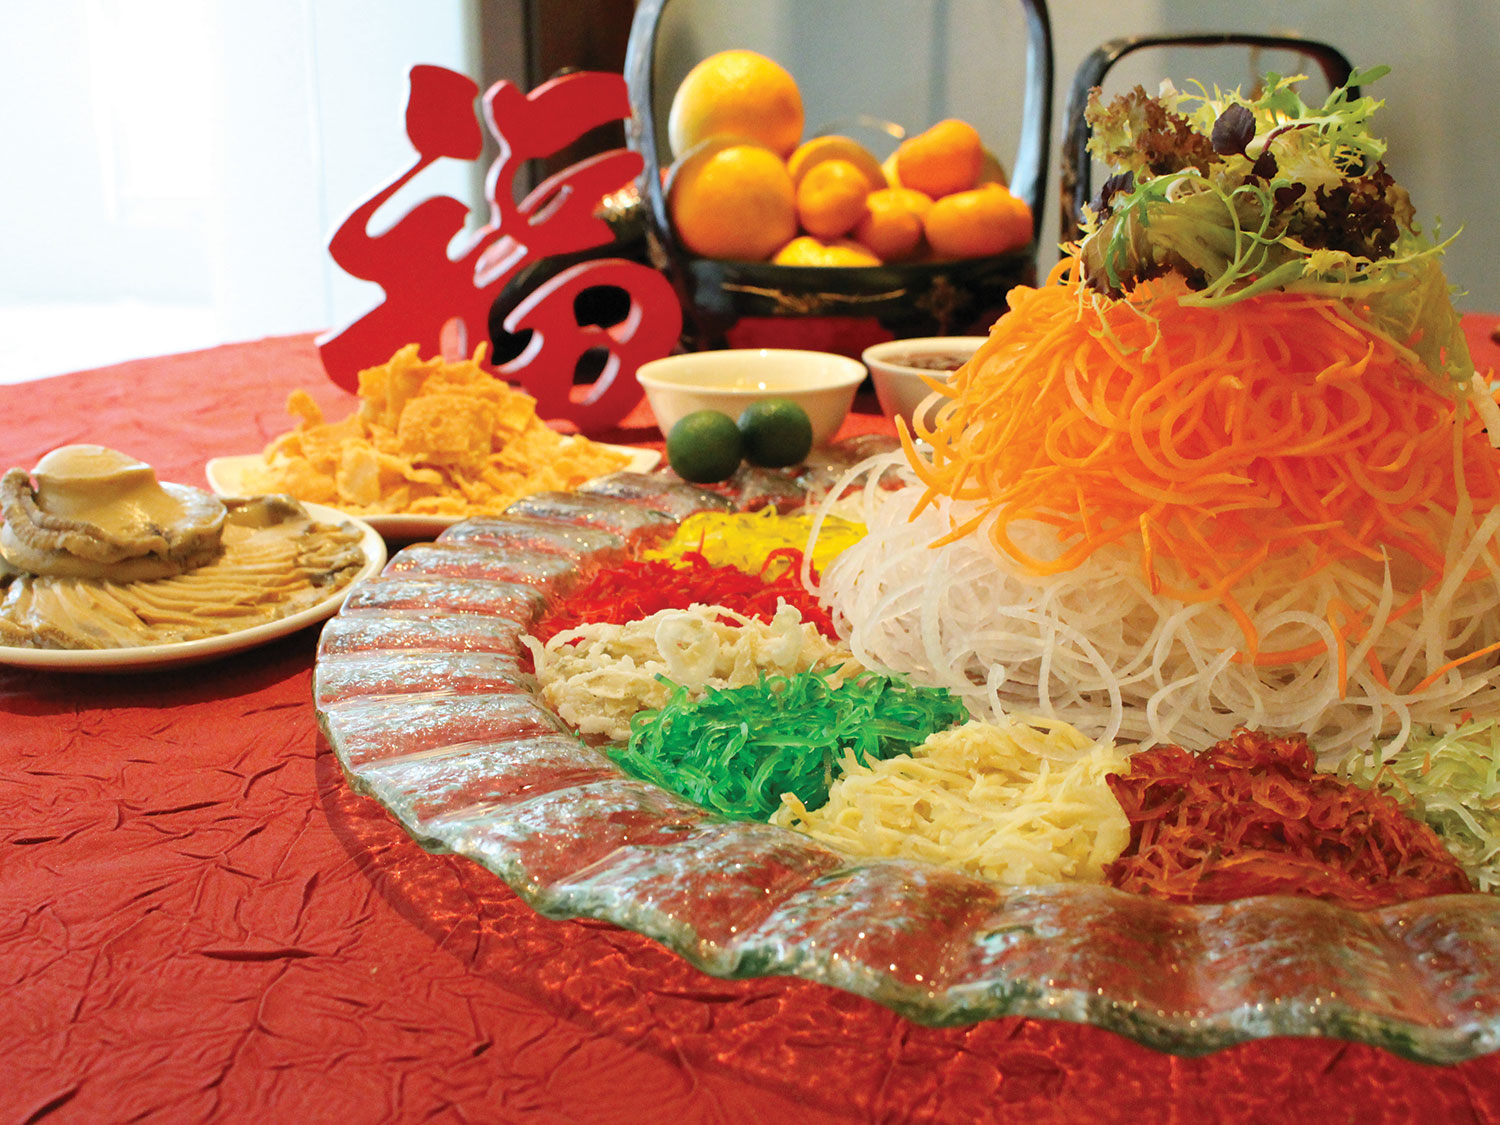 Celebrate Lunar New Year of the Dog at Grand Mercure Singapore Roxy